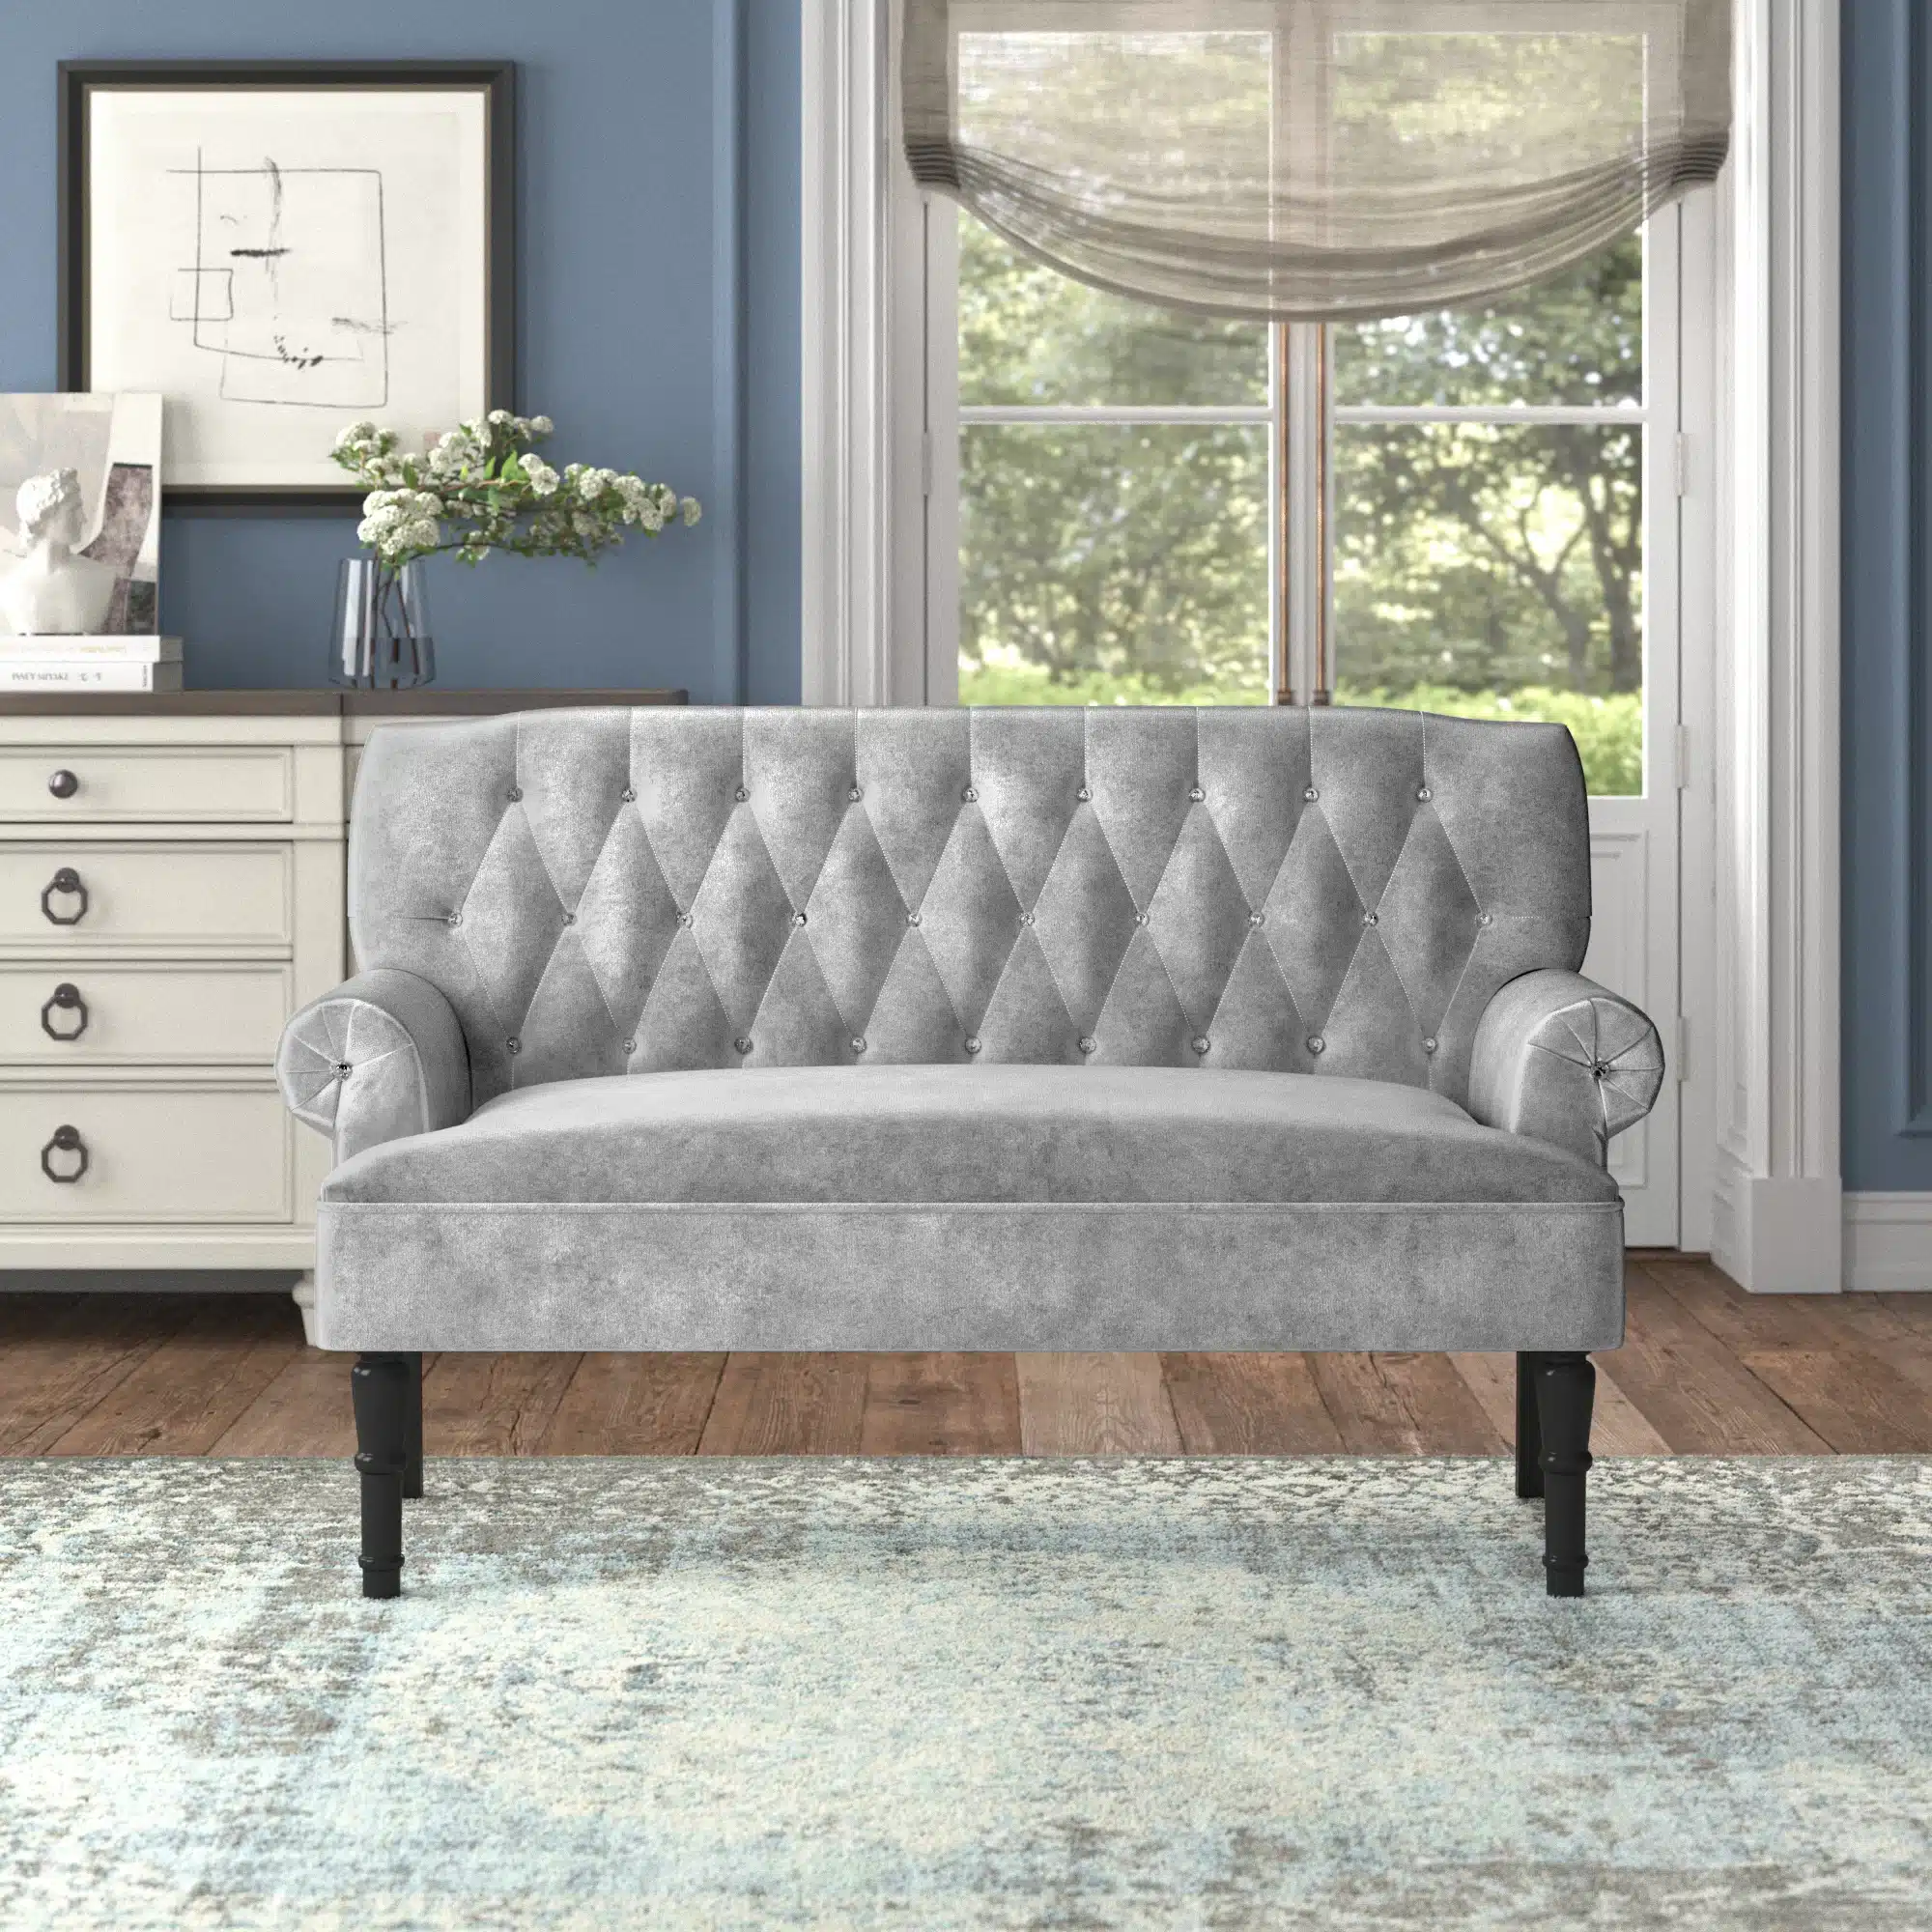 diamond tufted french country sofa 